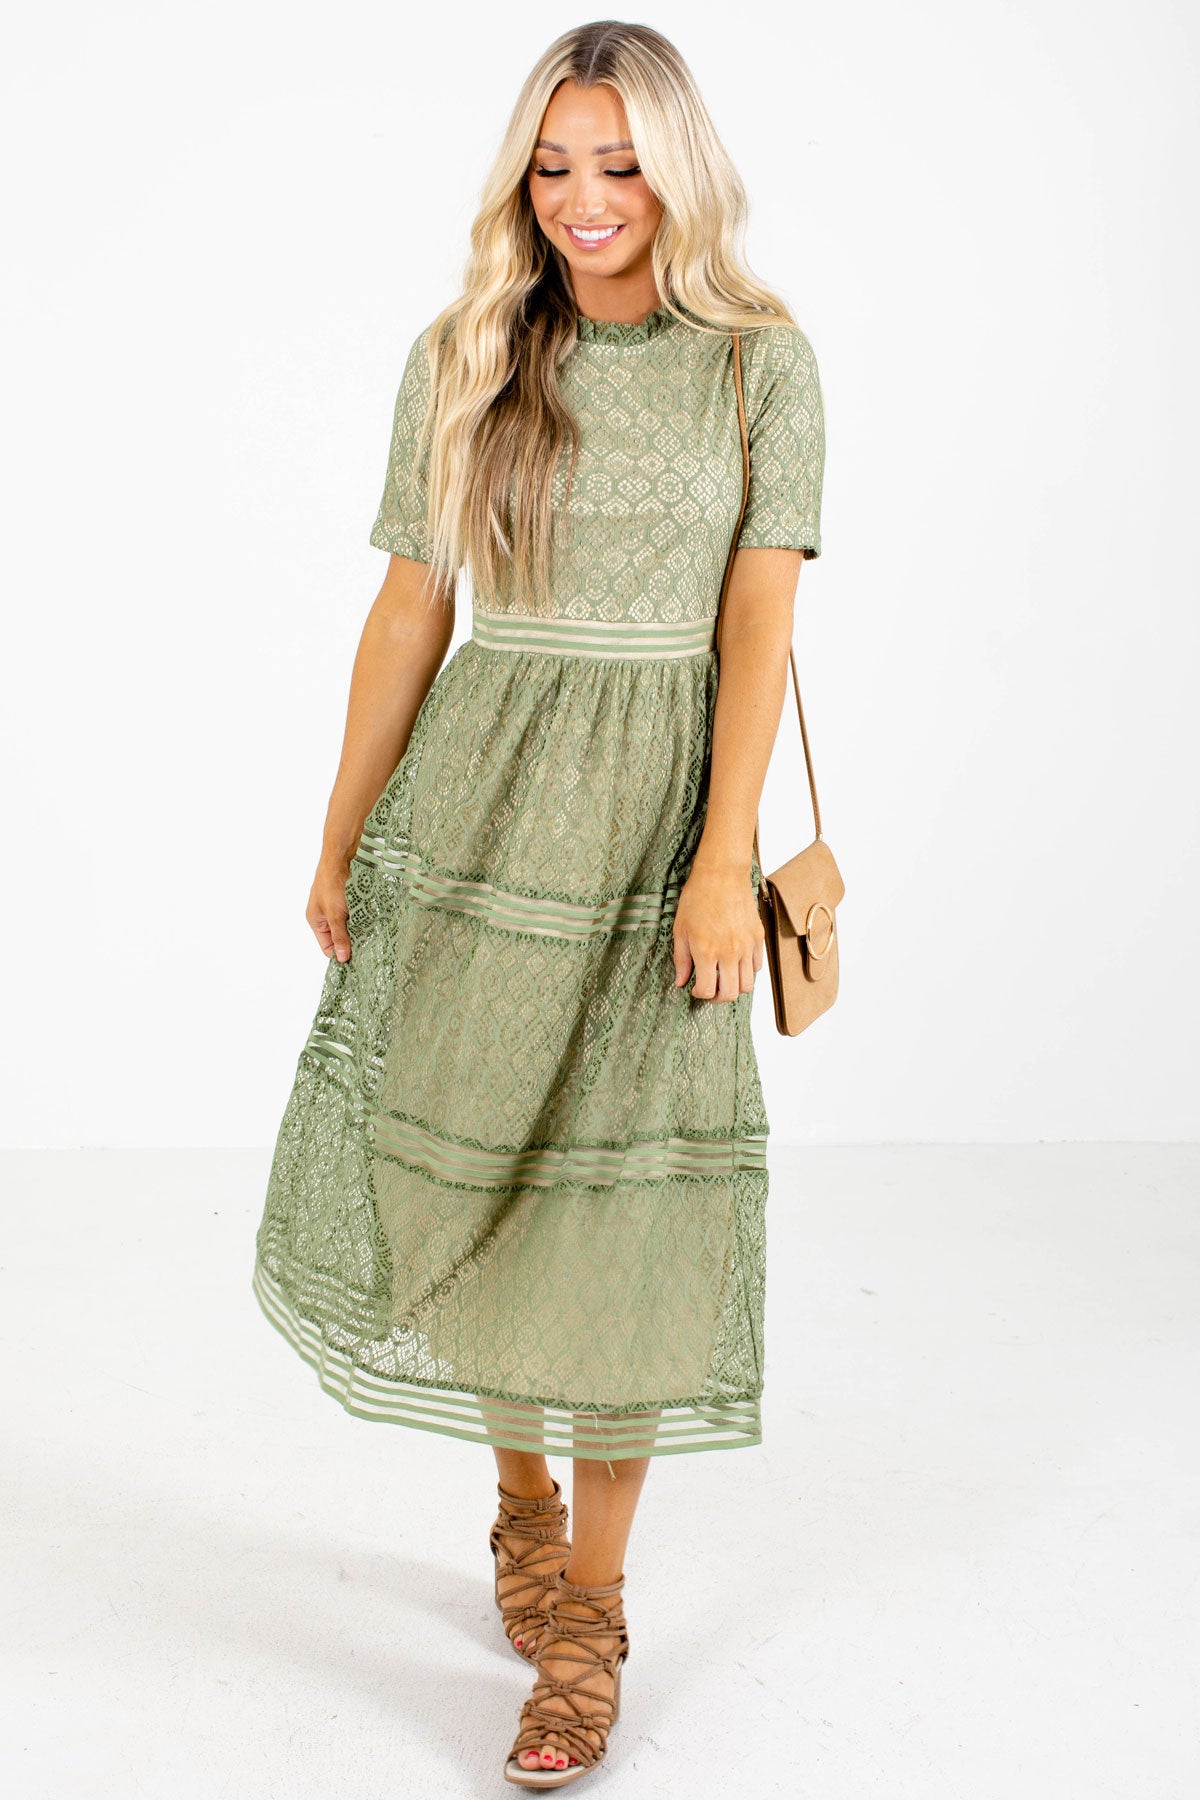 Women's Green Lace Material Boutique Dress